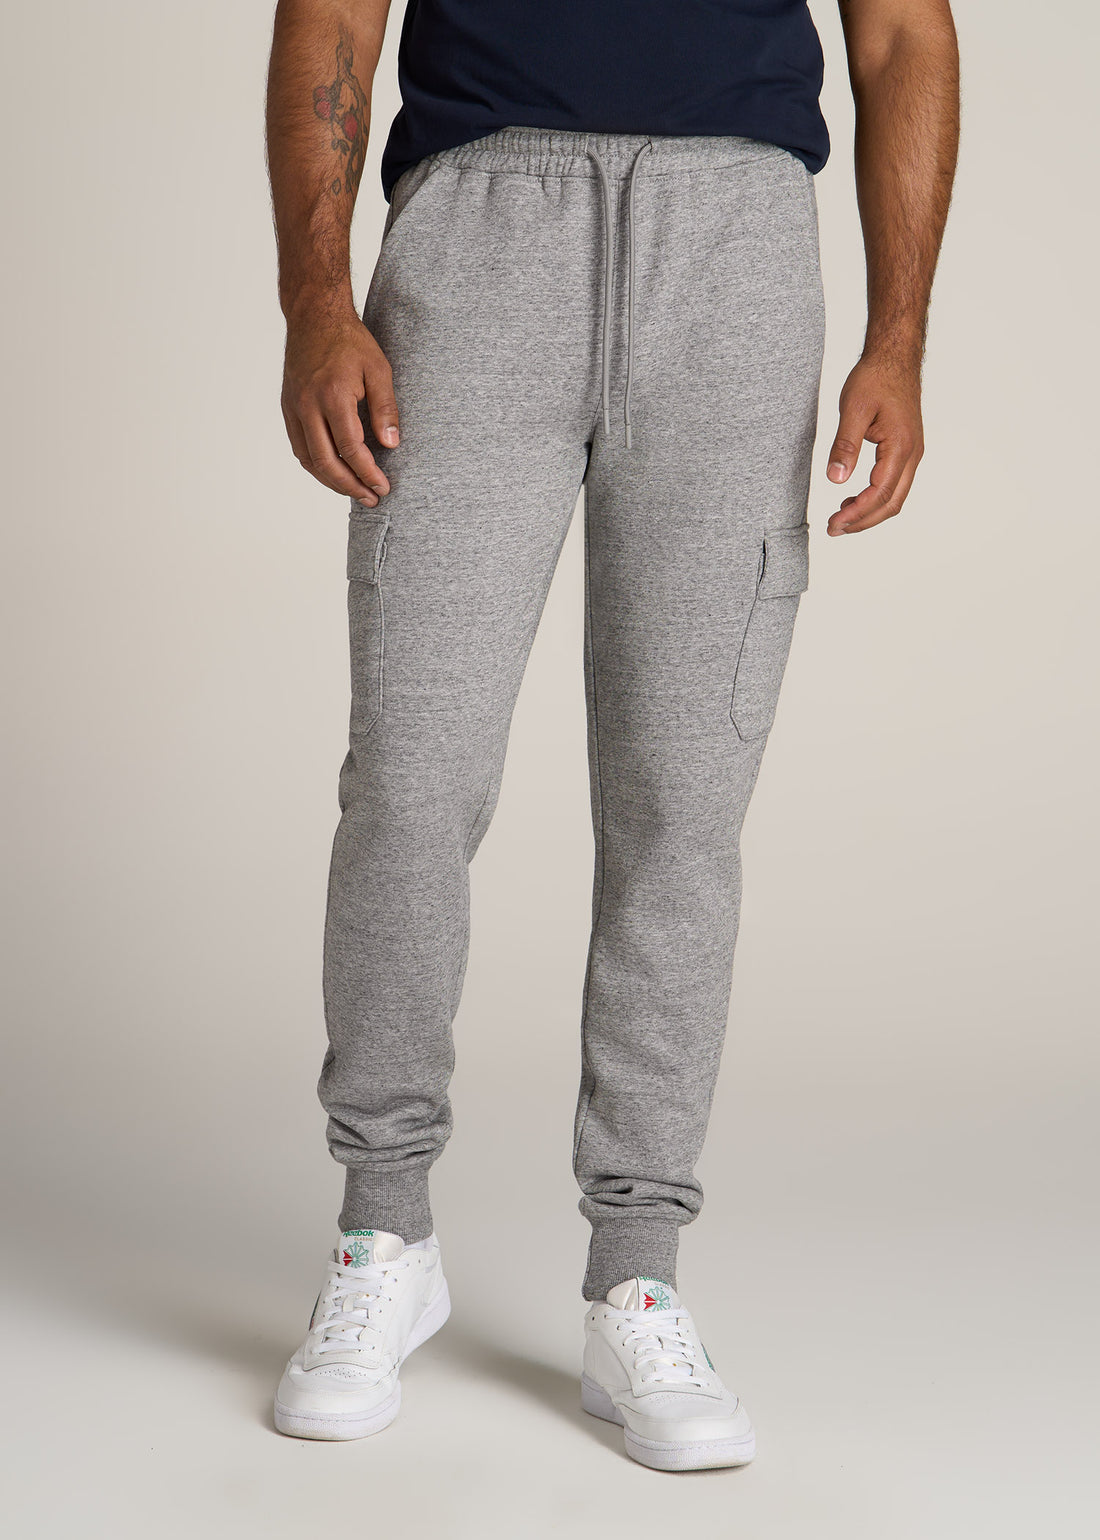 Buy Status Quo Mens Purple Slim Fit Mid Rise Track Pants Online at Low  Prices in India - Paytmmall.com